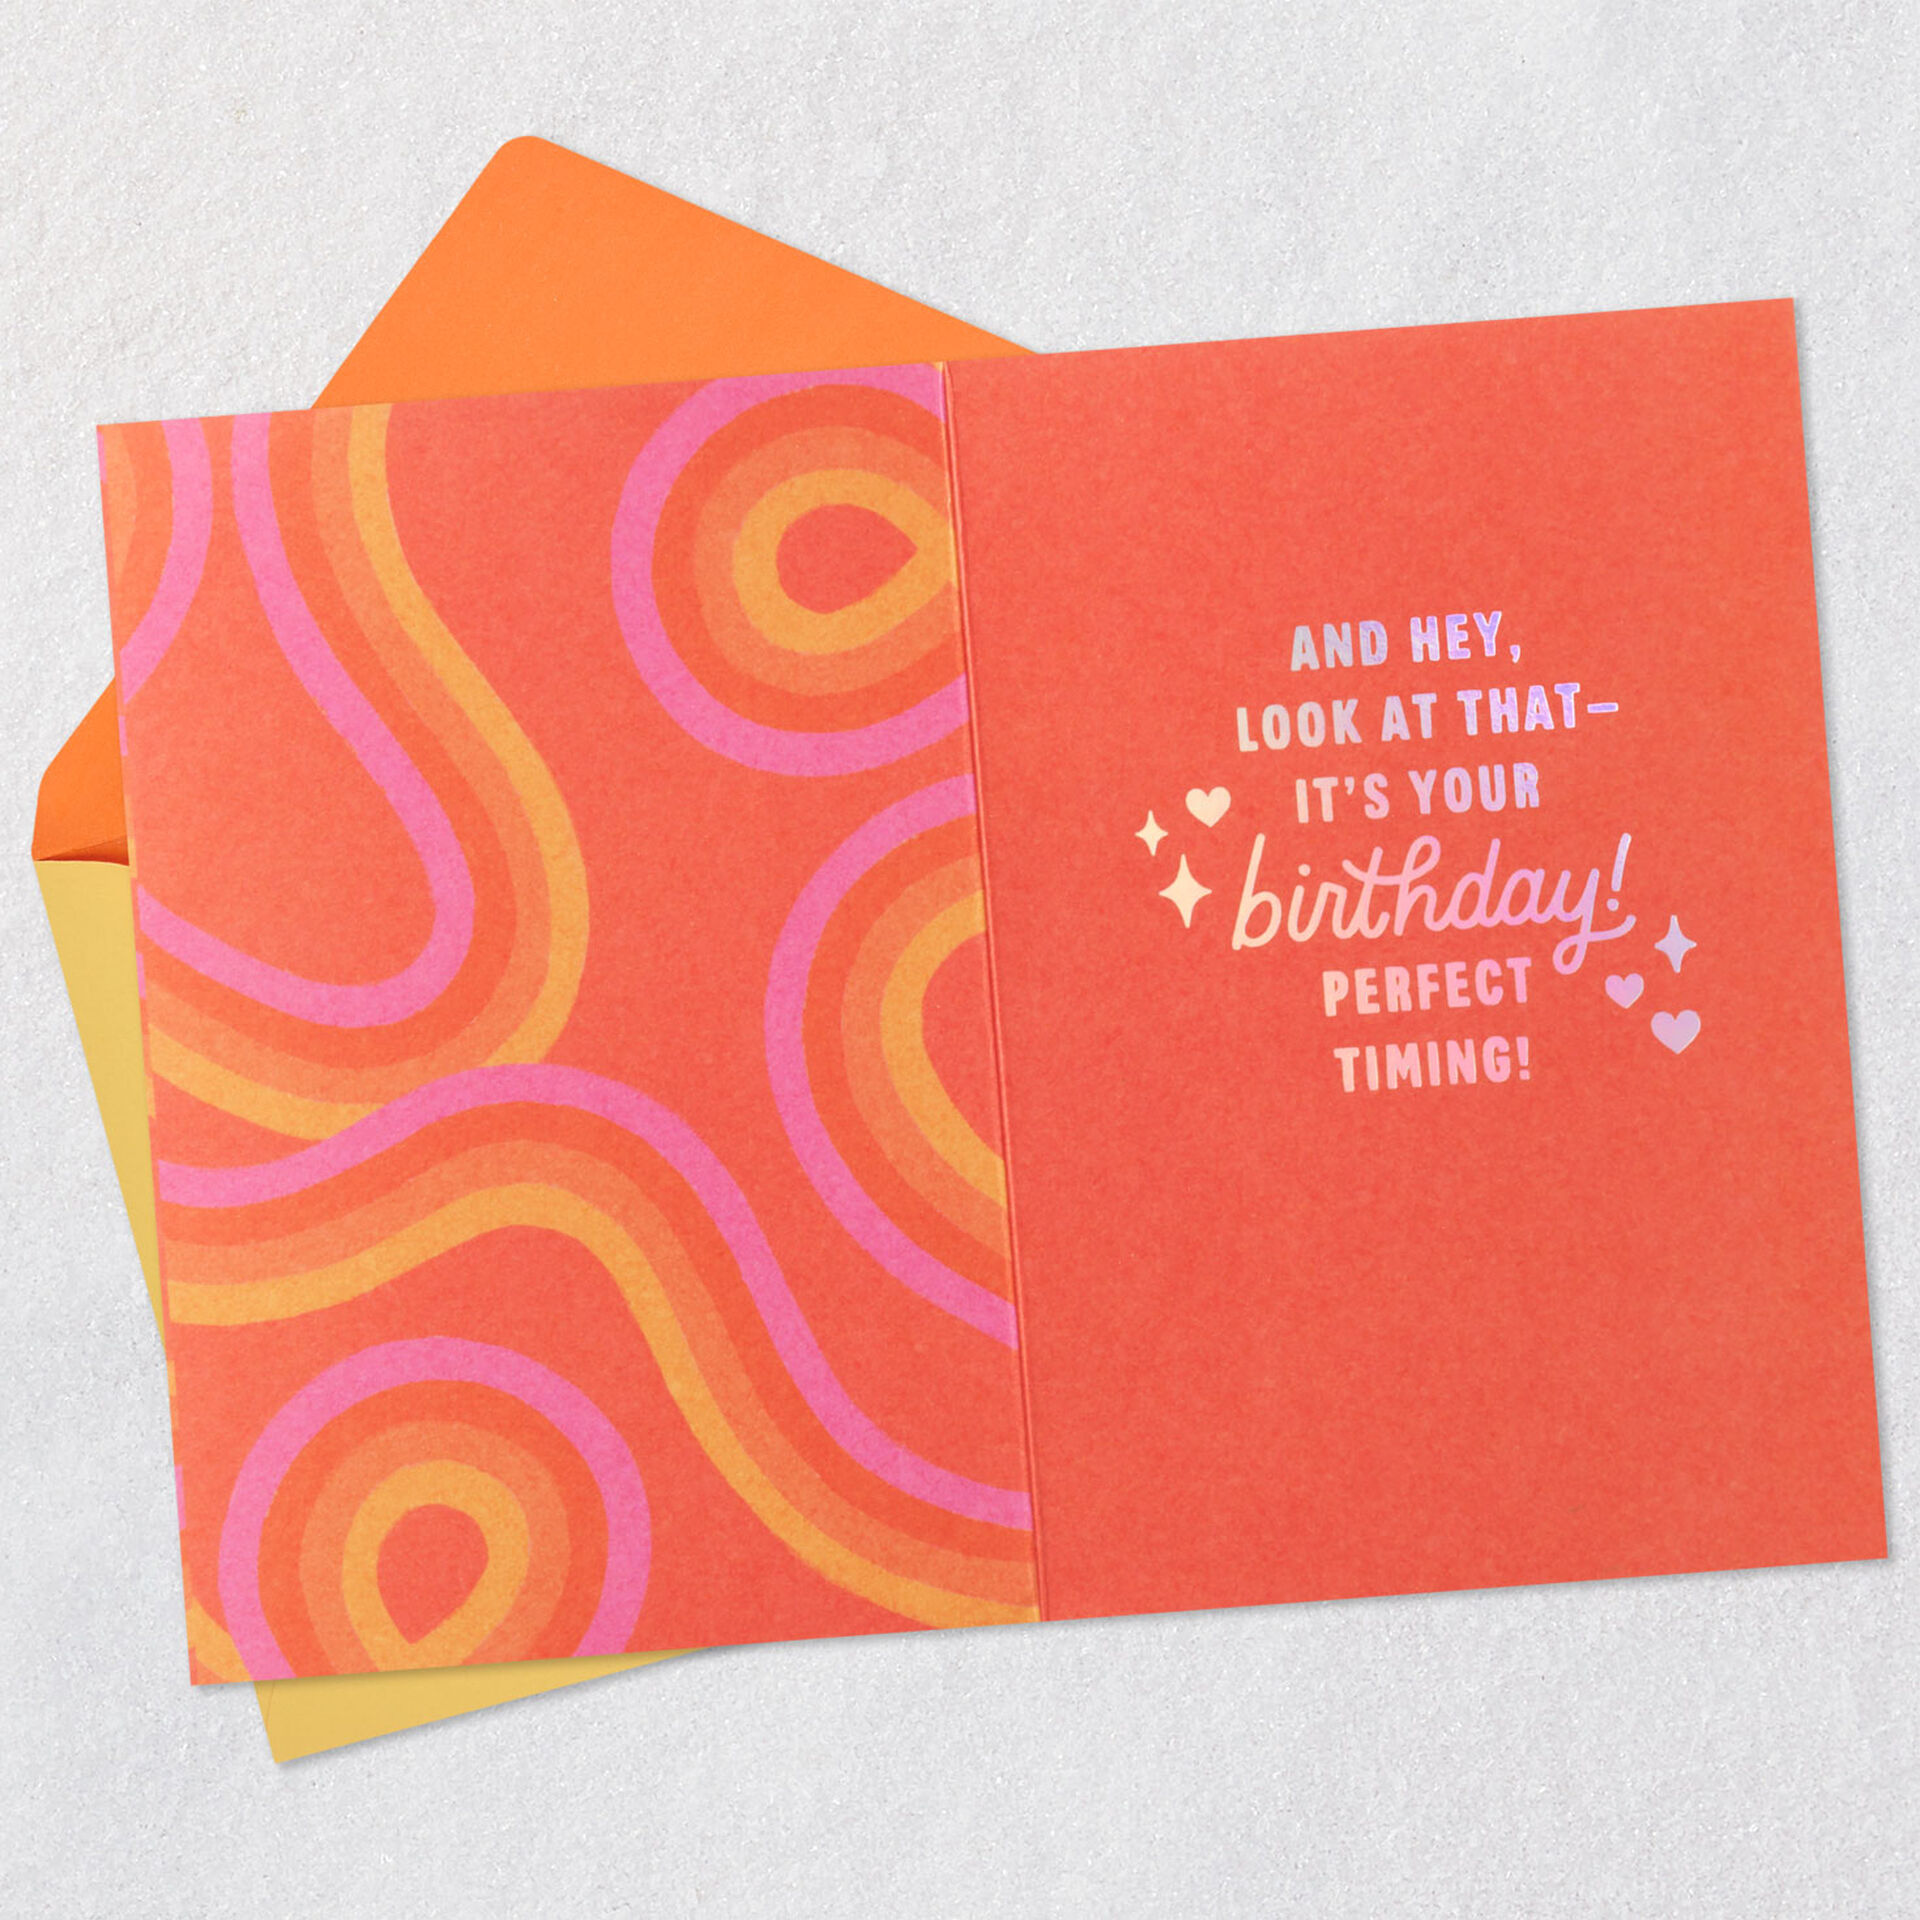 Groovy-Swirls-and-Hearts-Birthday-Card-for-Her_399FBD6118_03